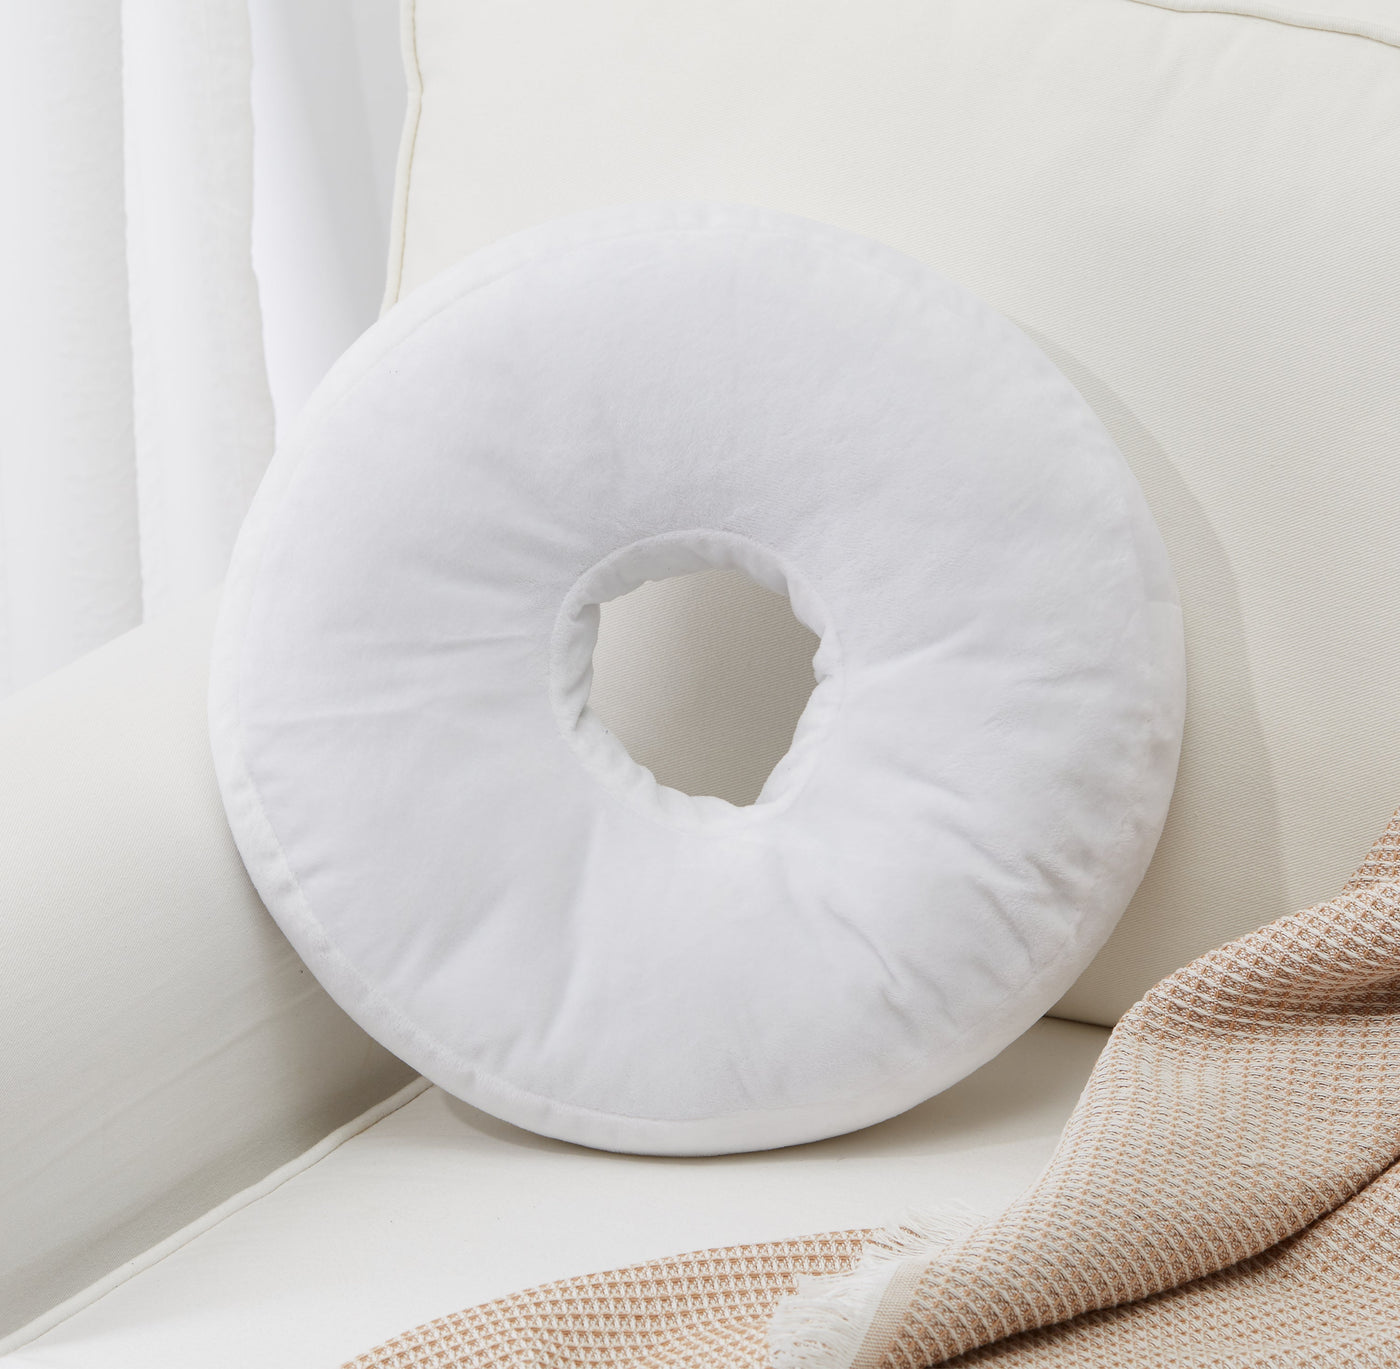 https://www.cheercollection.com/cdn/shop/products/cheer-collection-round-donut-pillow-super-soft-microplush-doughnut-pillow-and-comfy-seat-cushion-for-kids-and-adults-487370_1400x.jpg?v=1672395980